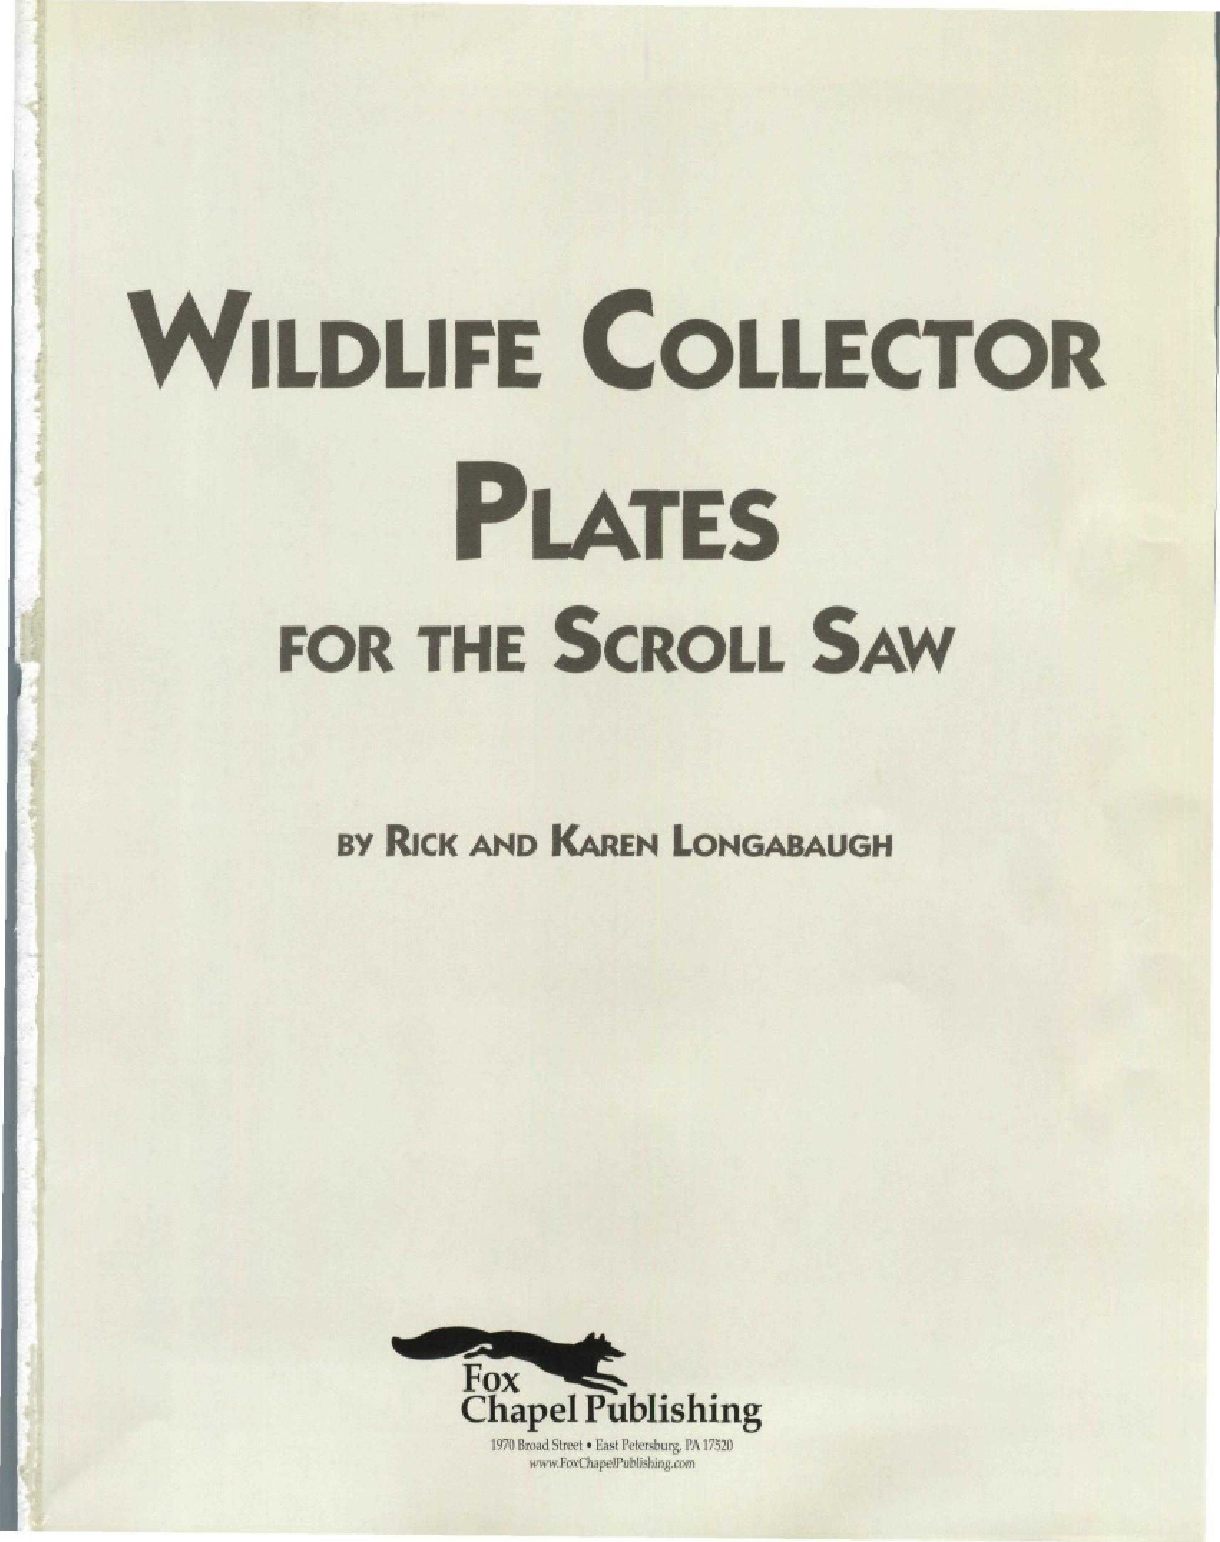 Wildlife Collector Plates for the Scroll Saw